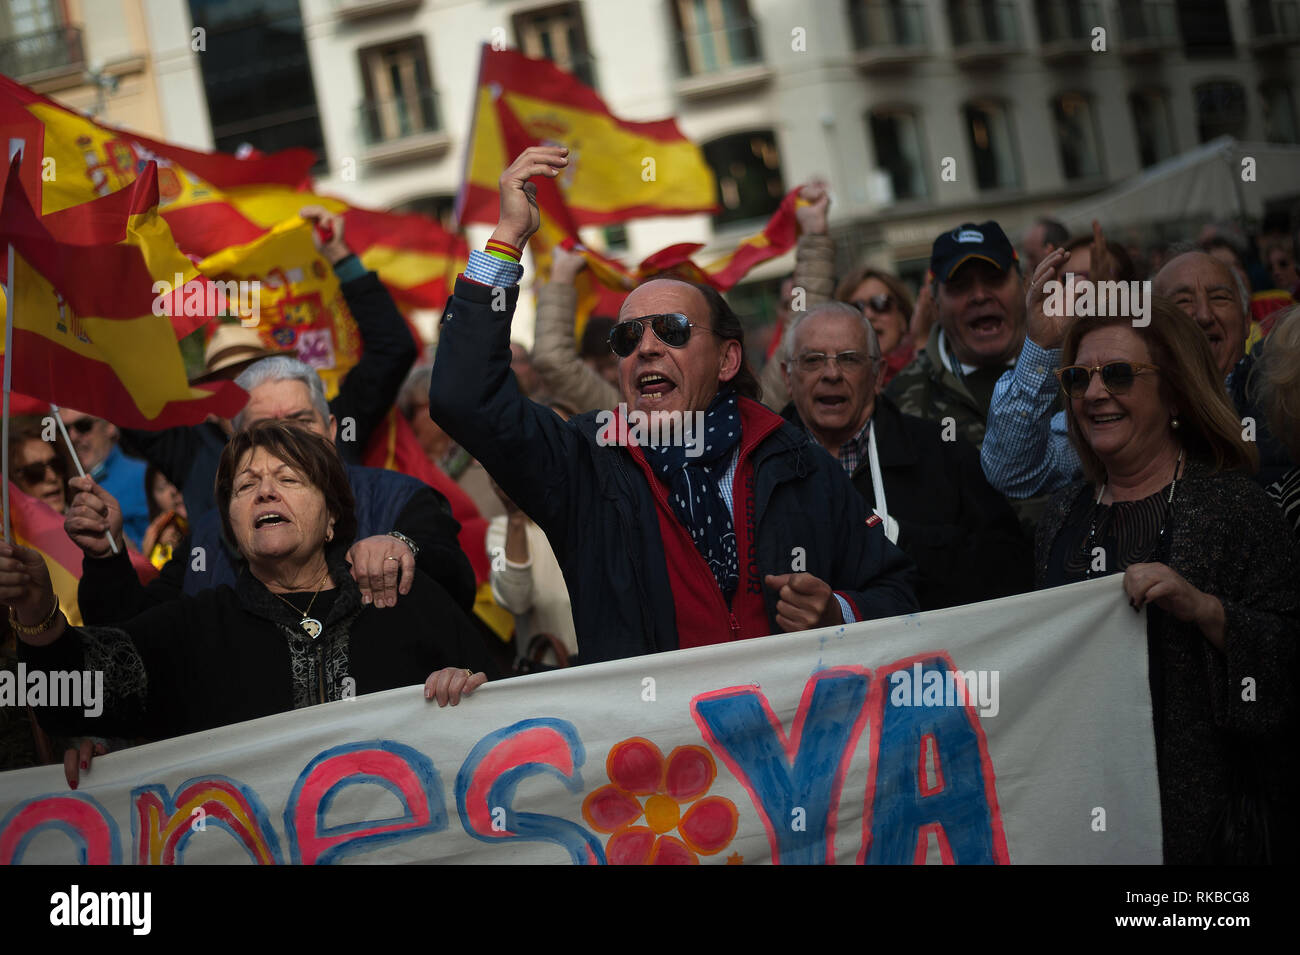 A supporter of the unite between Spain and Catalonia called by right parties, is seen shouting slogans as he takes part in a demonstration against the Spanish government of Pedro Sánchez. Stock Photo